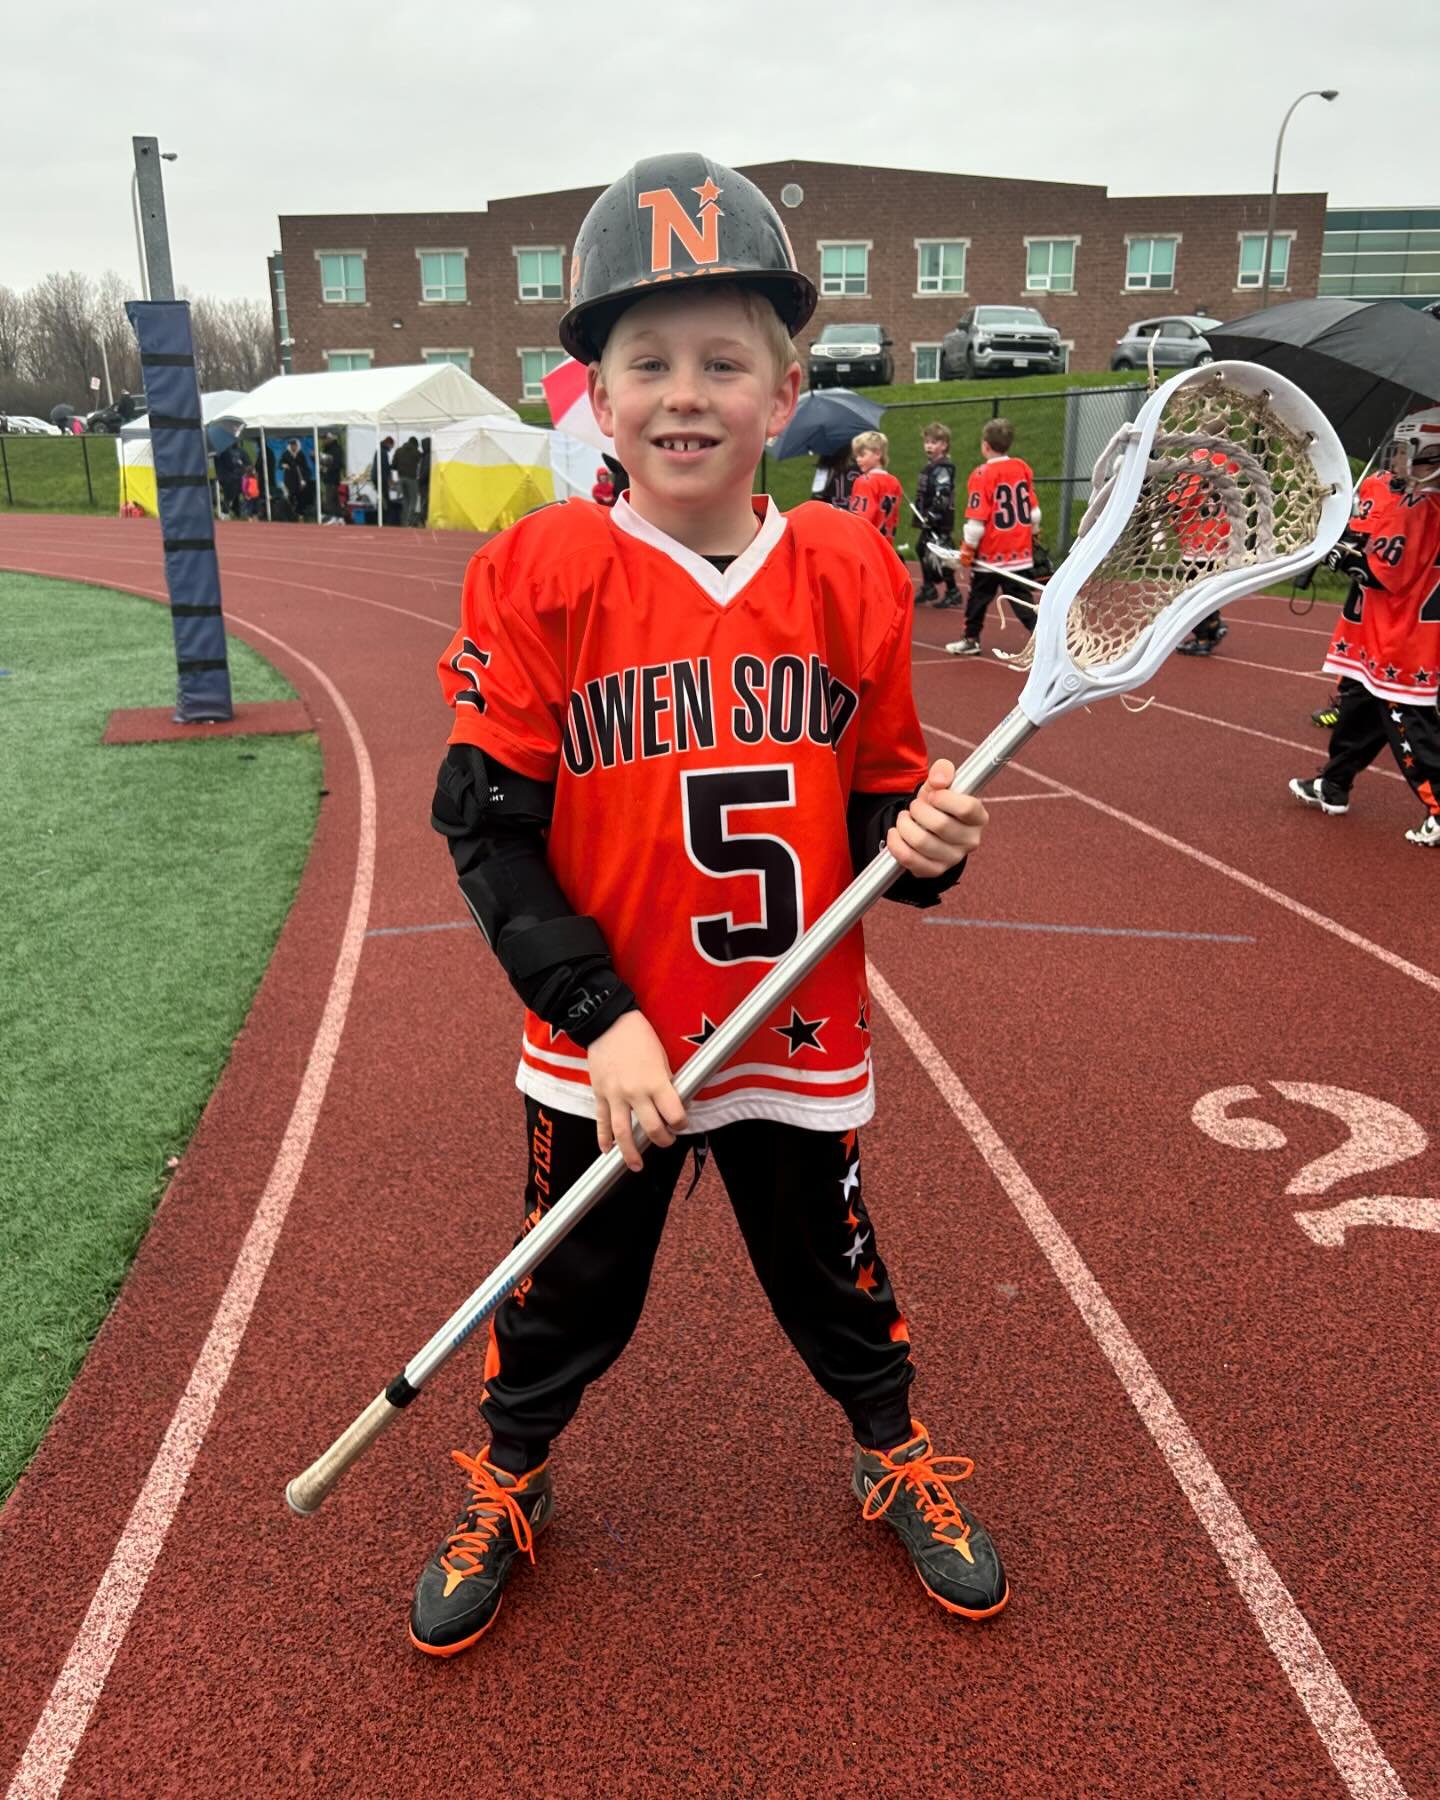 Two more wins and a tough 4-3 loss today for the U9 Field Boys 🥍